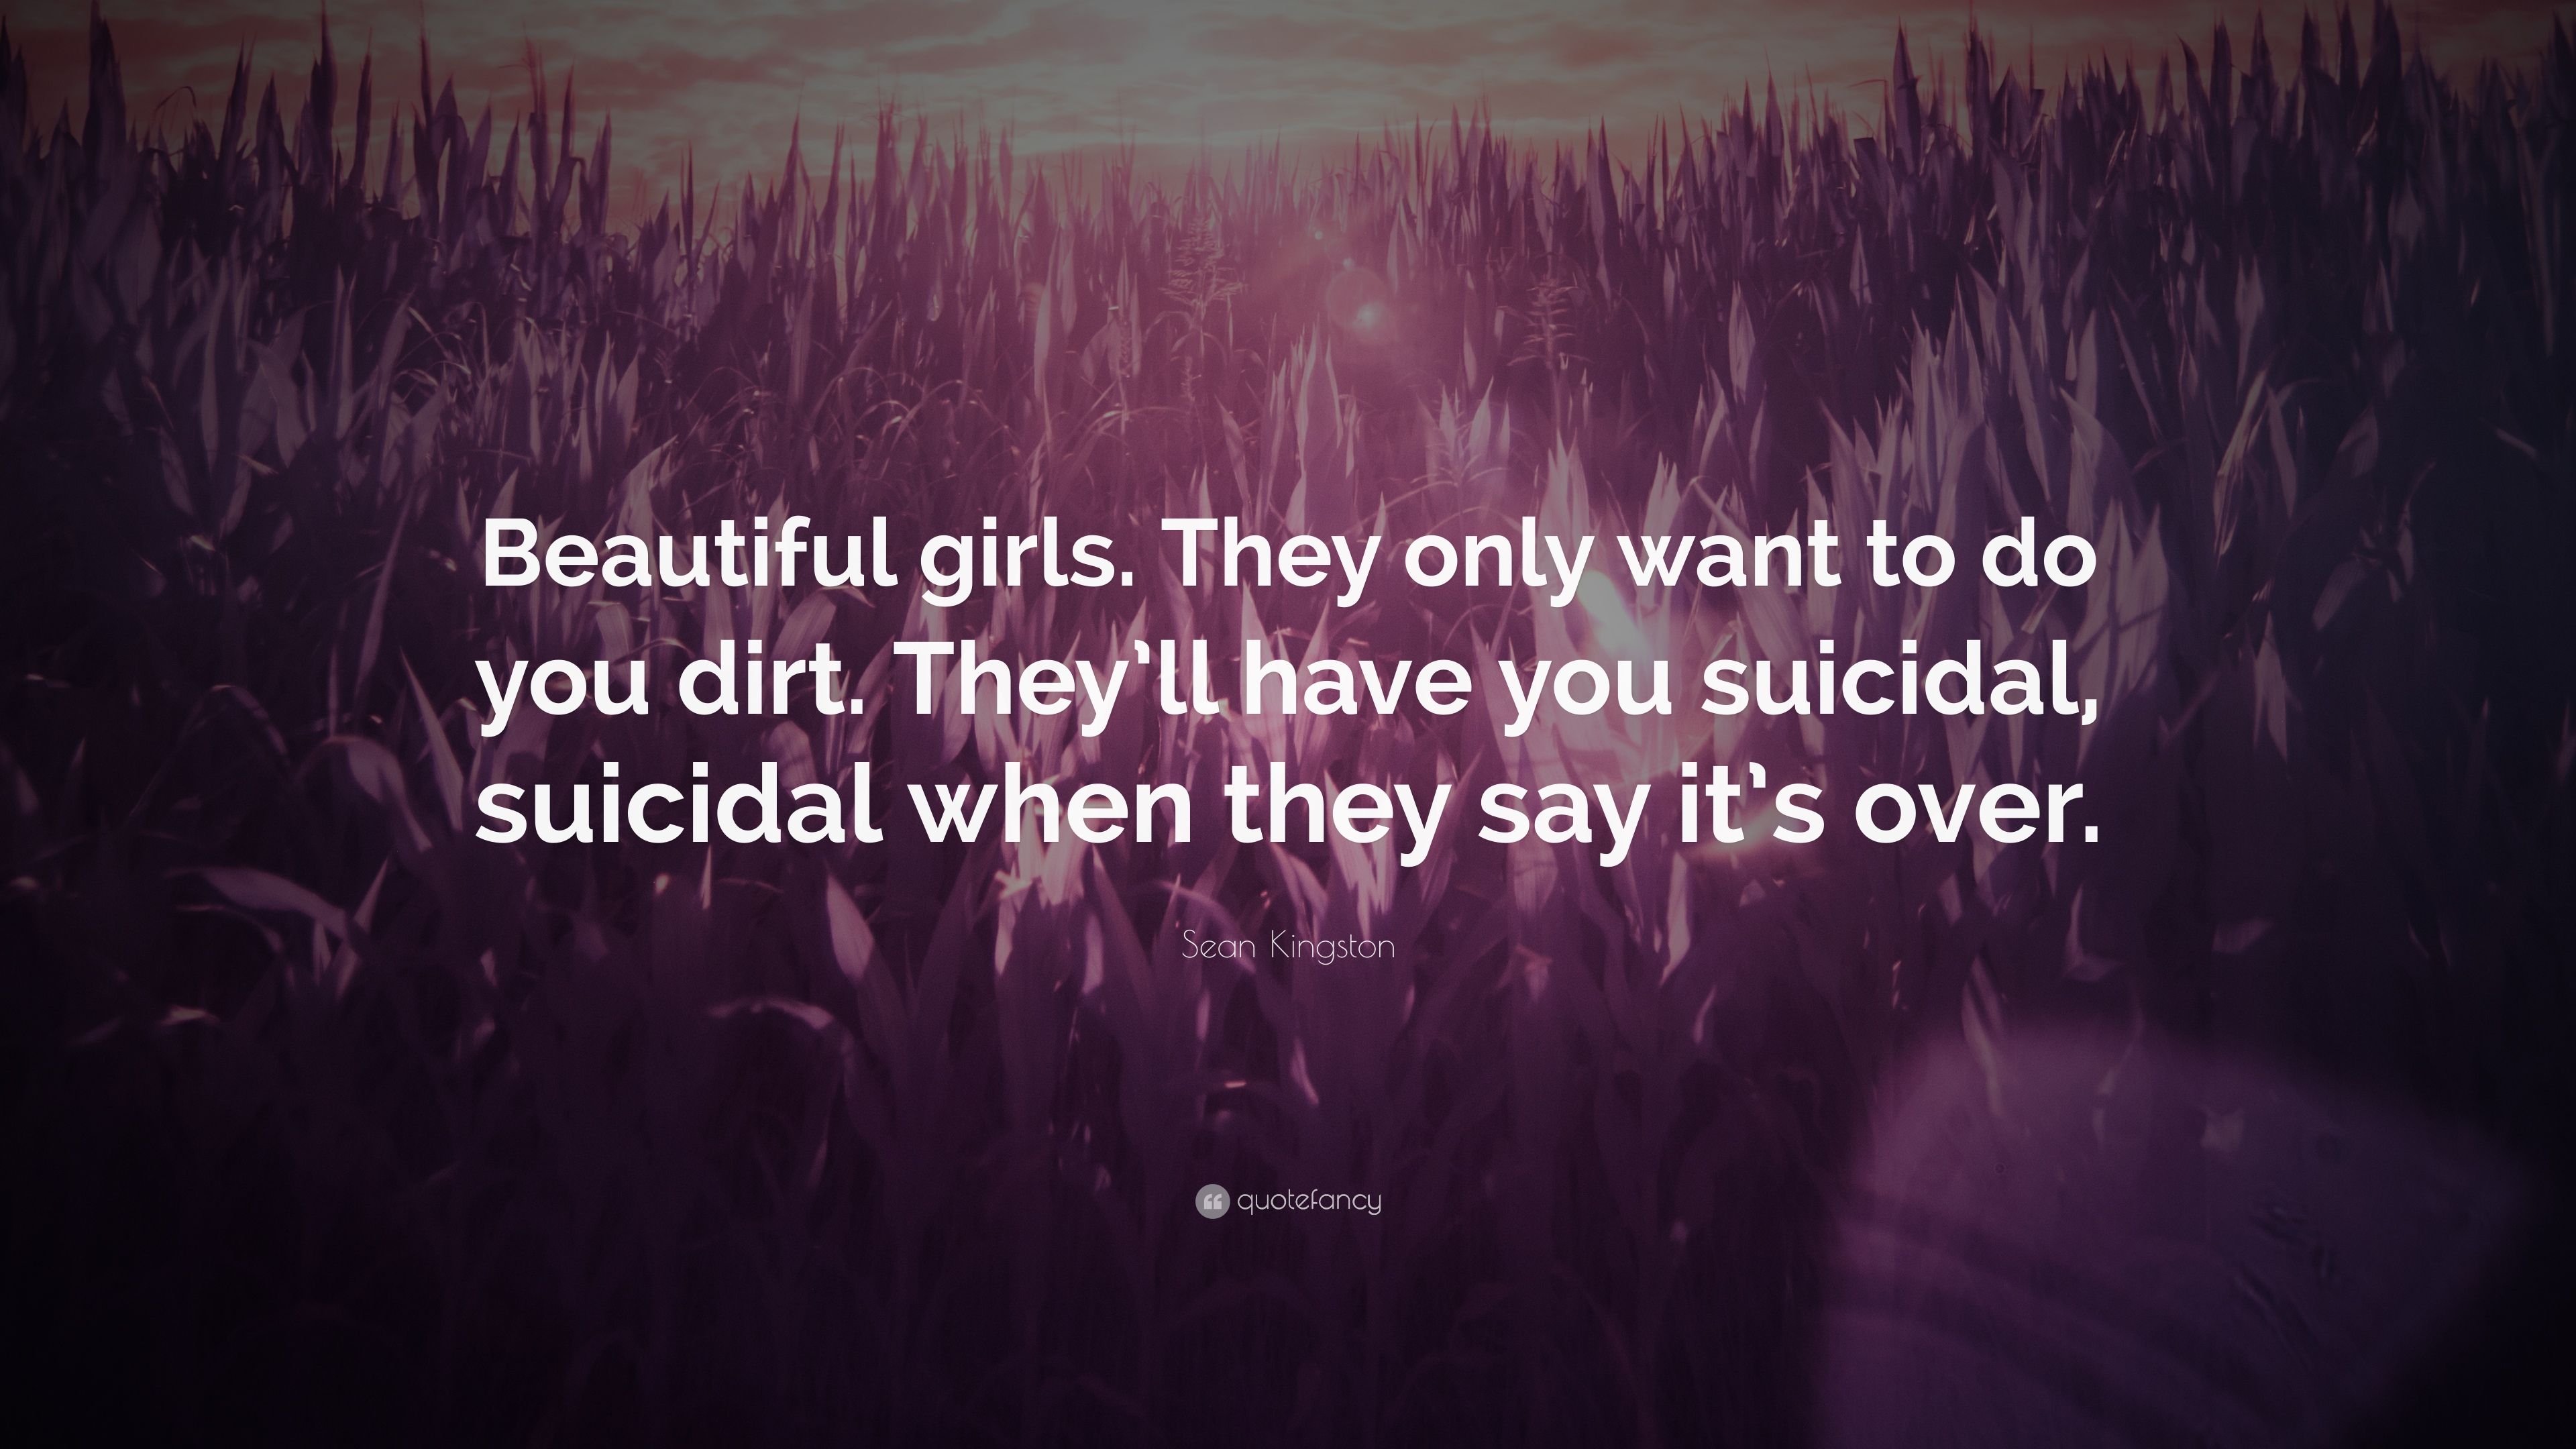 Sean Kingston Quote: “Beautiful girls. They only want to do you dirt. They'll have you suicidal, suicidal when they say it's over.” (7 wallpaper)